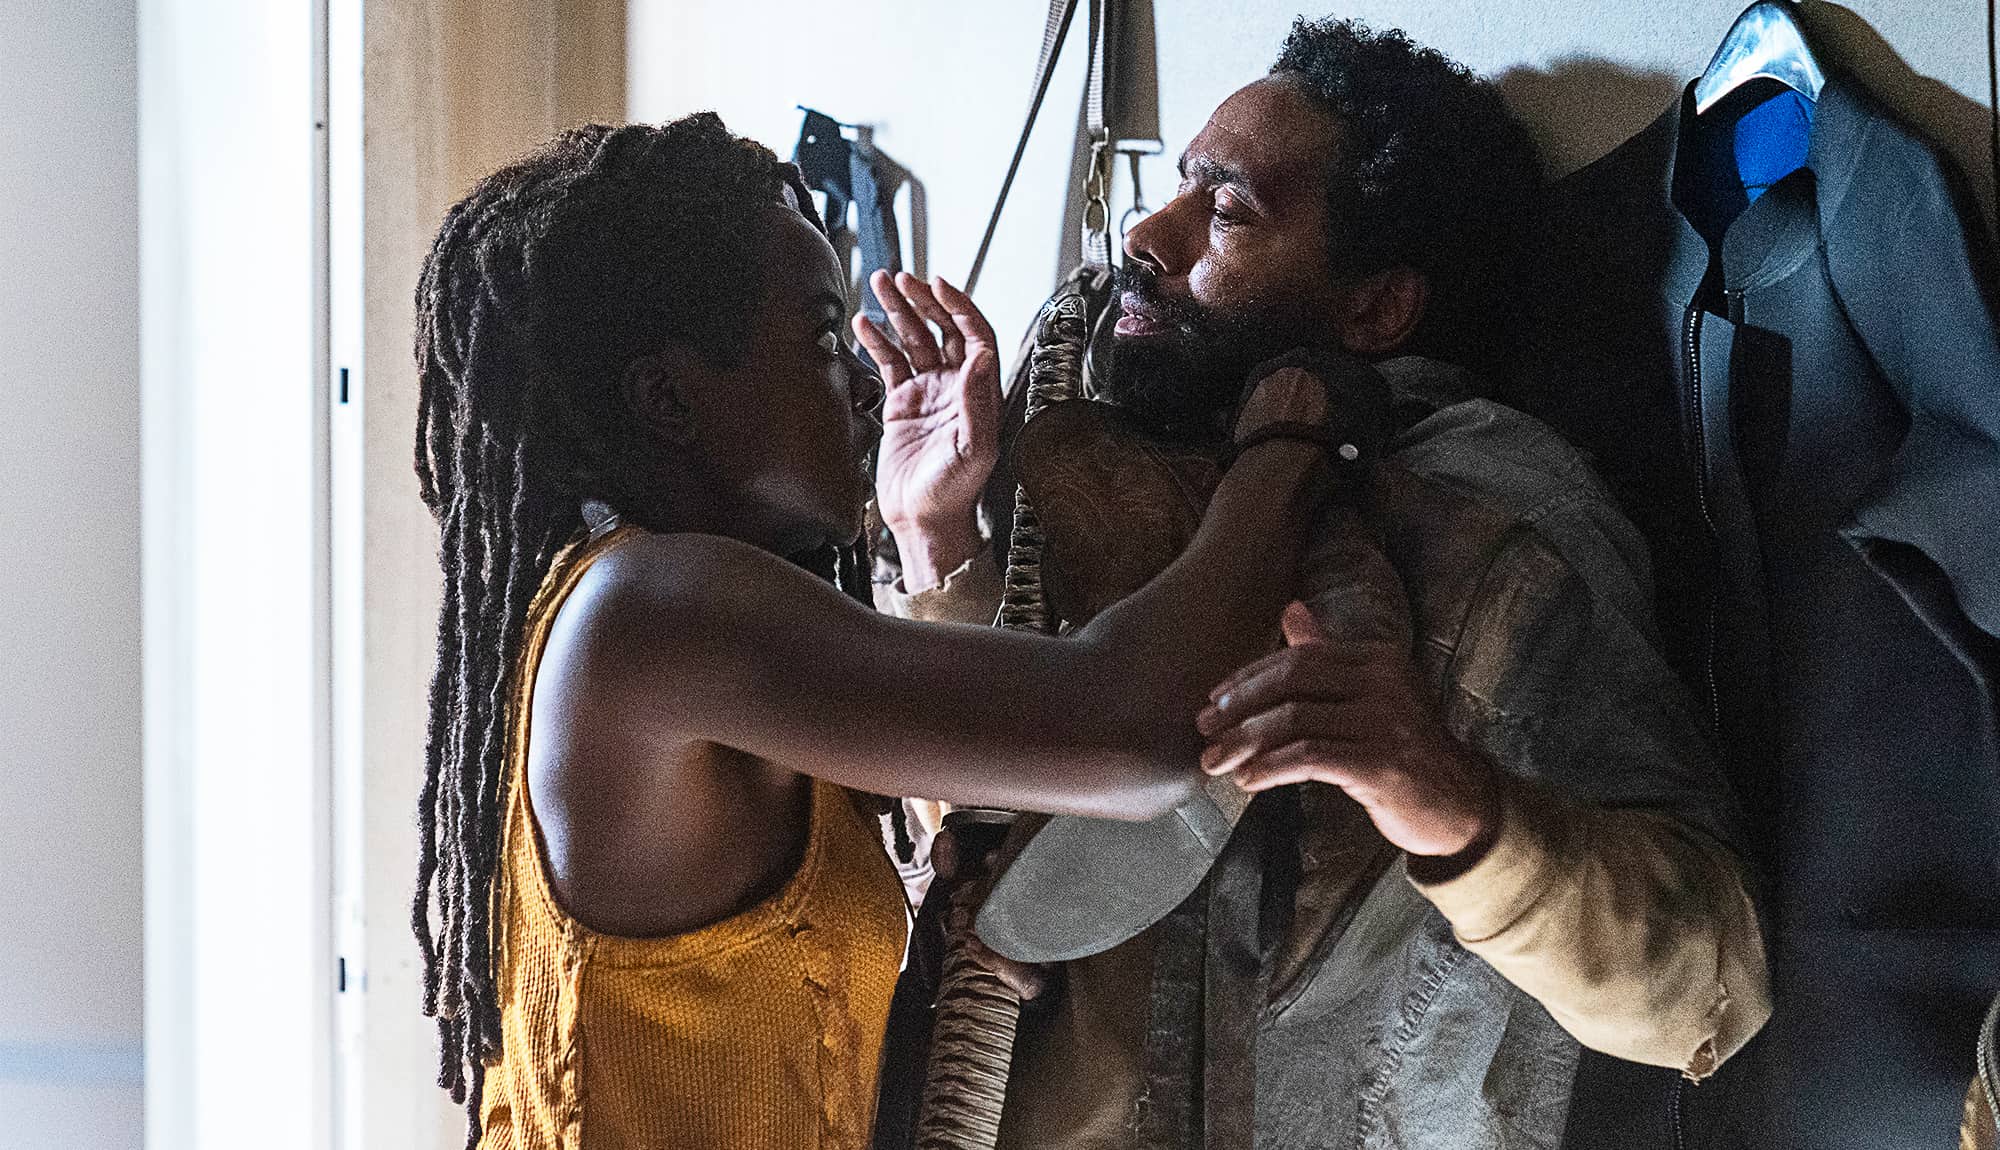 The Best Images From Michonne’s Last Episode on The Walking Dead